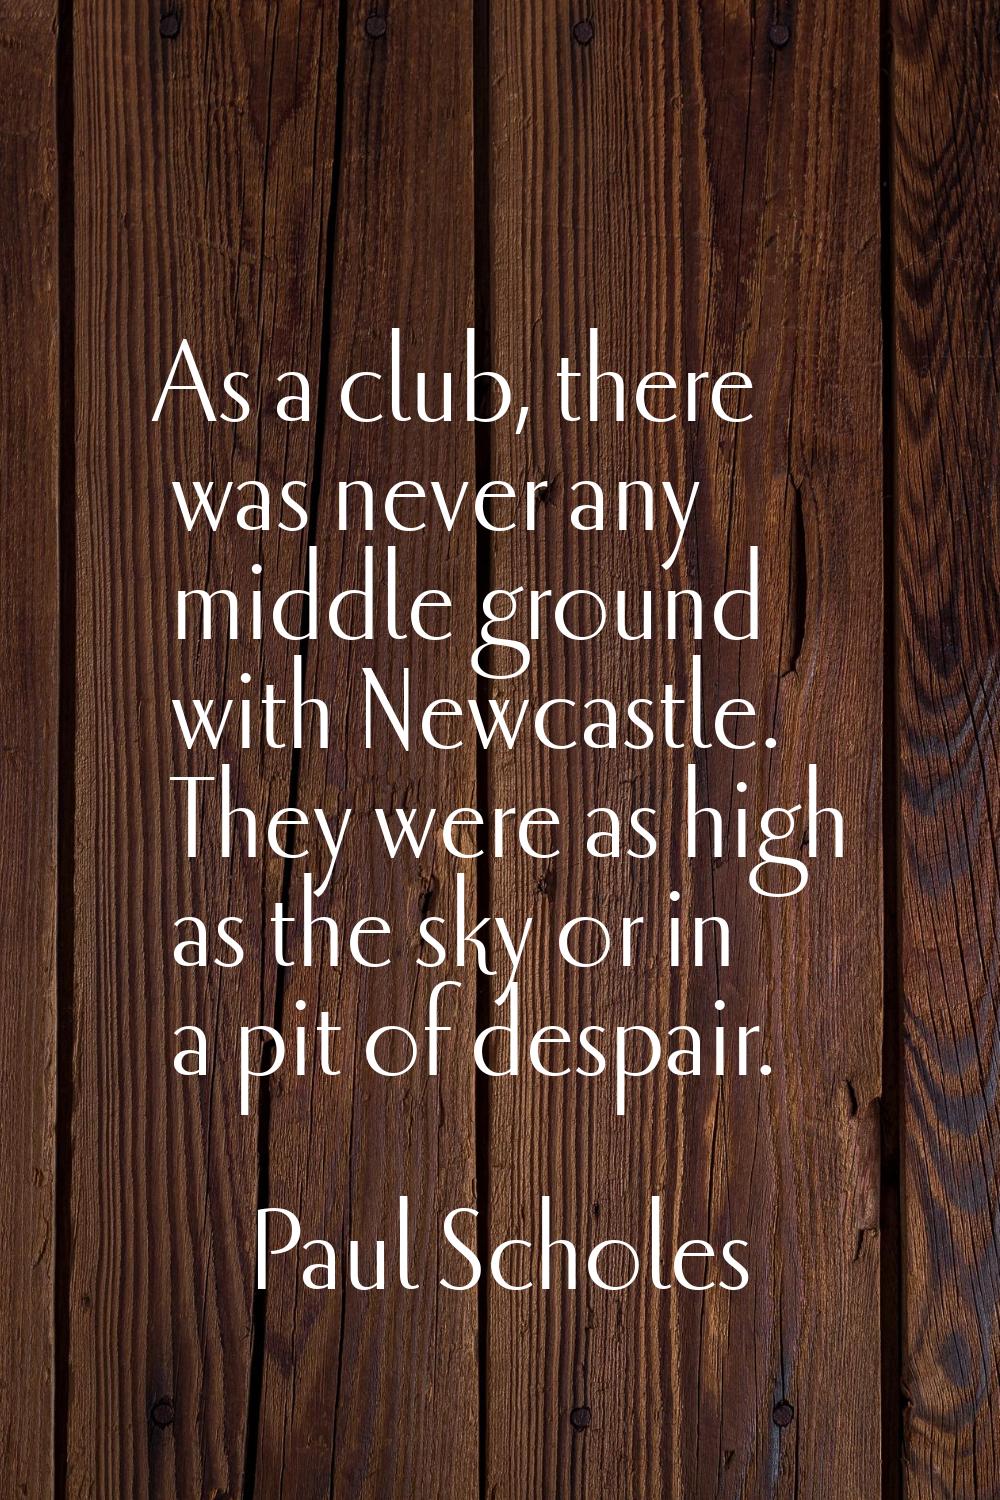 As a club, there was never any middle ground with Newcastle. They were as high as the sky or in a p